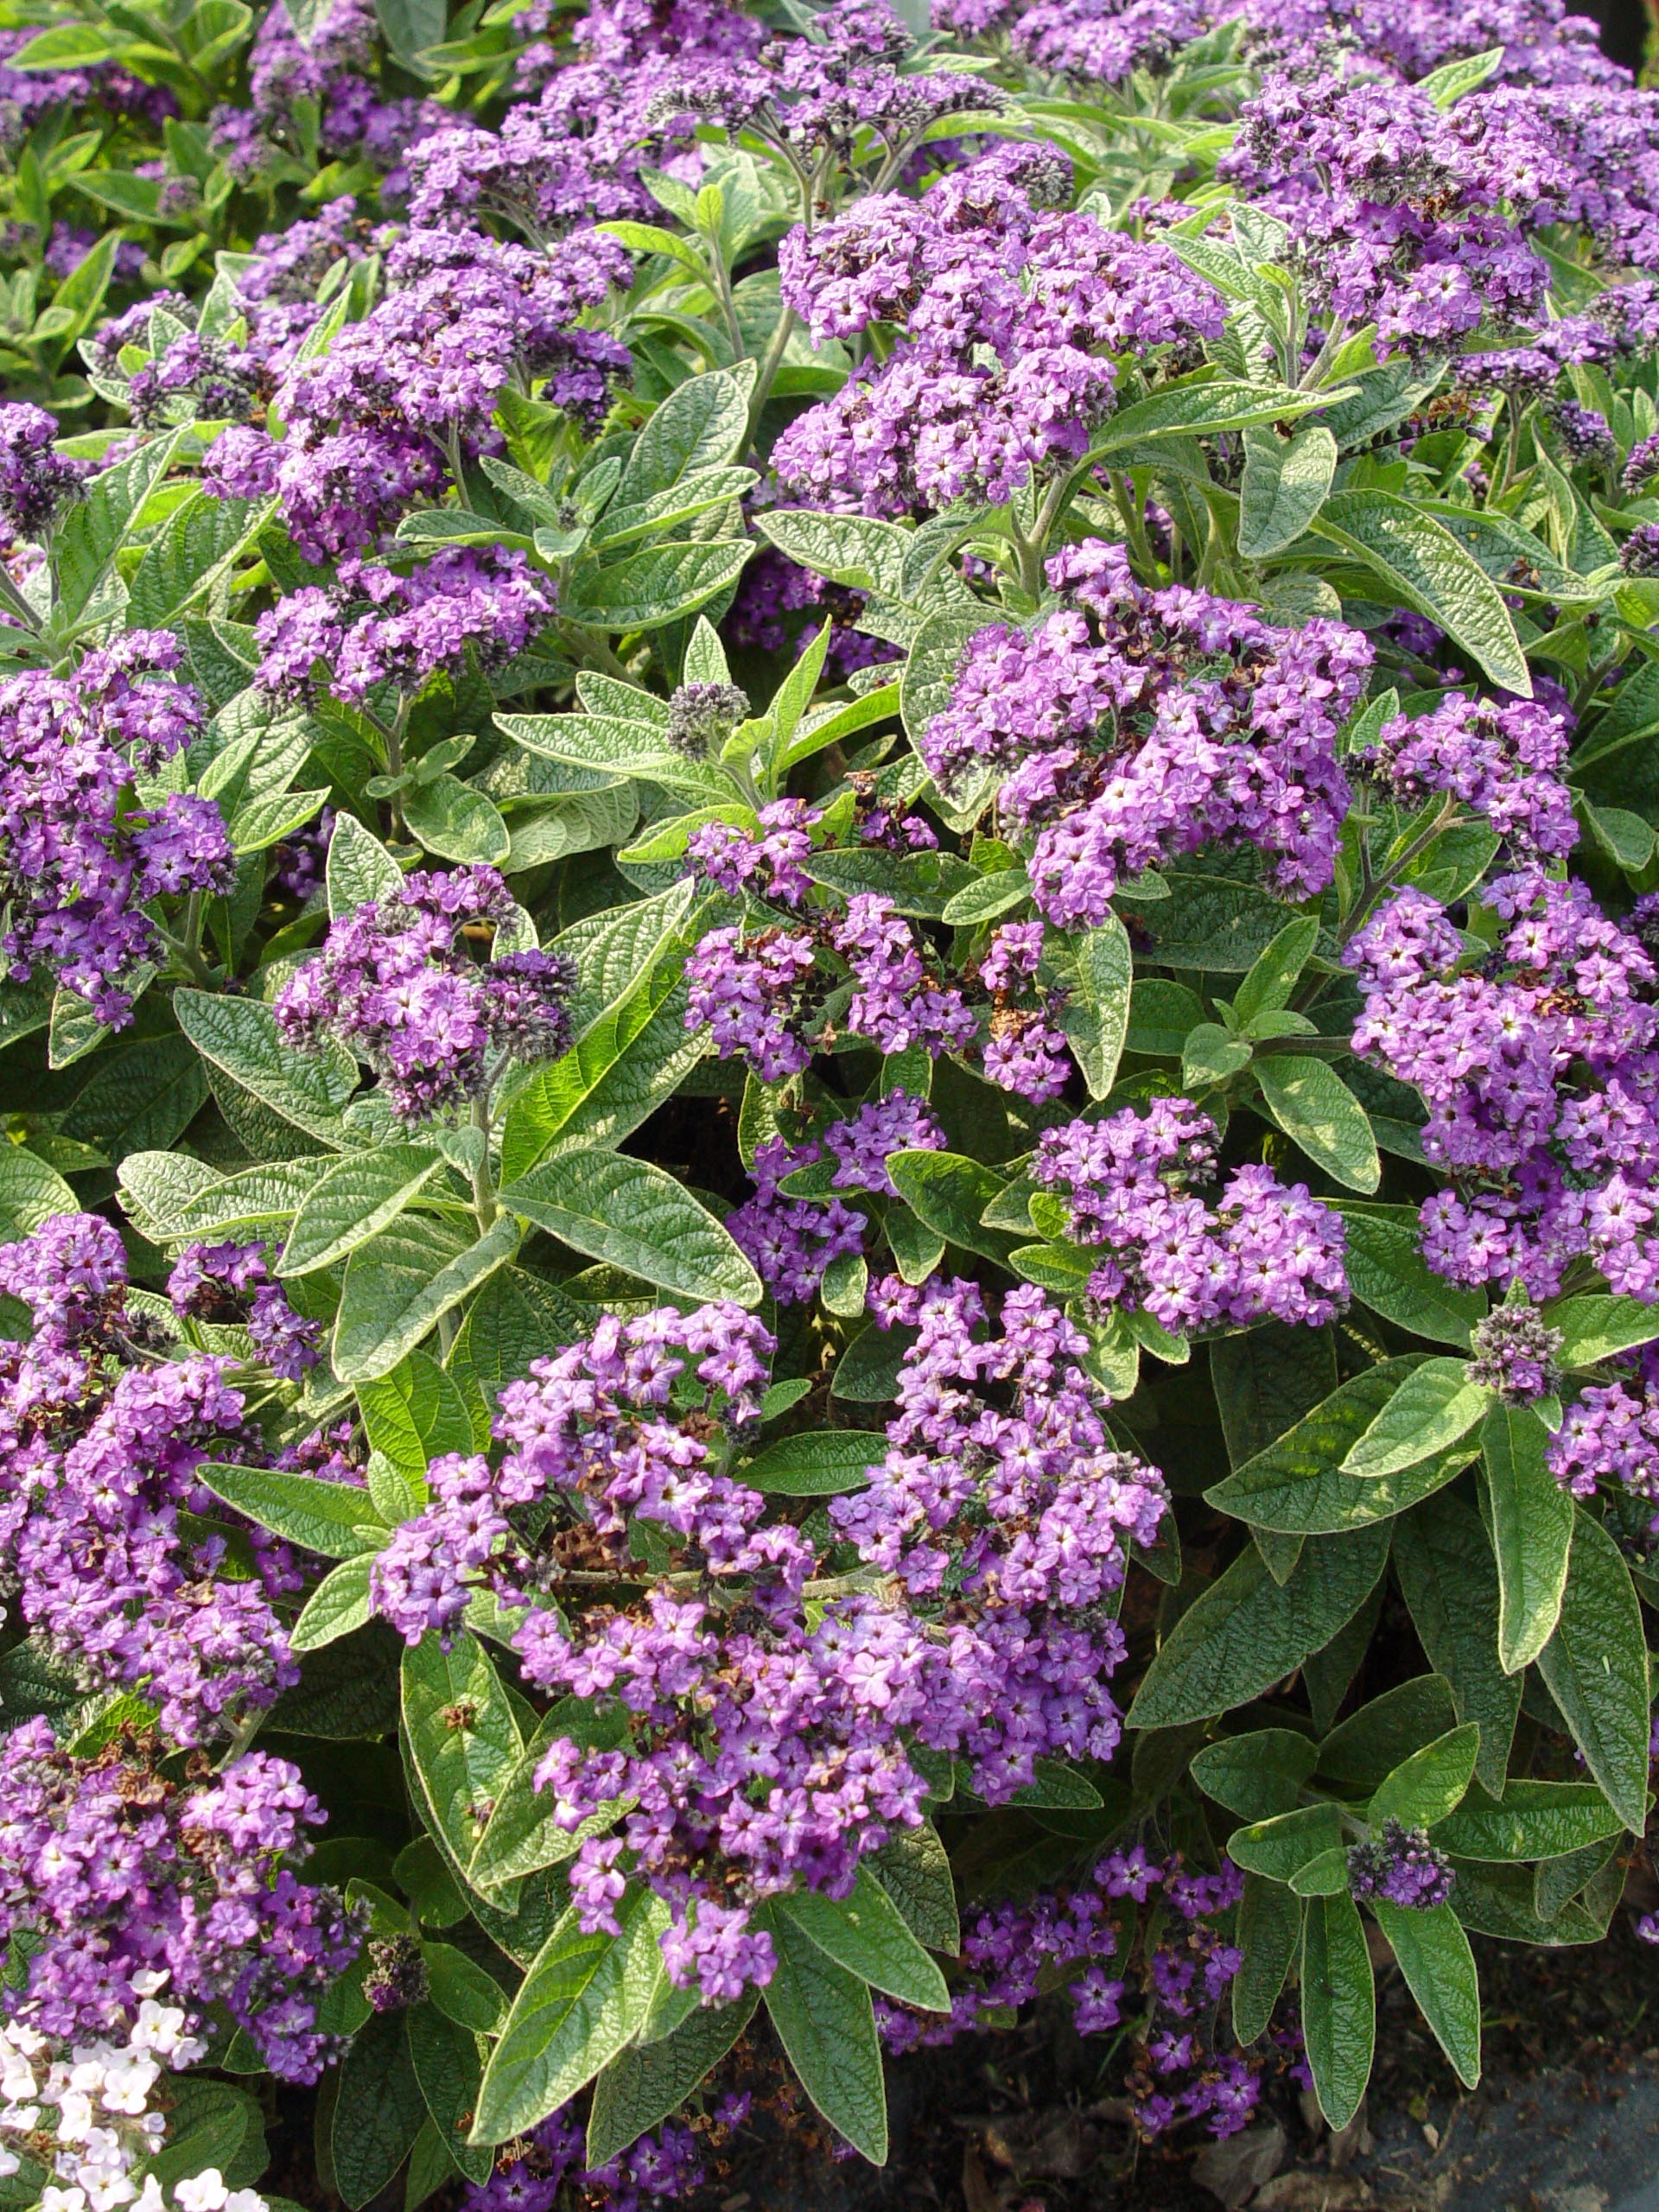 The Name of the Heliotrope Color